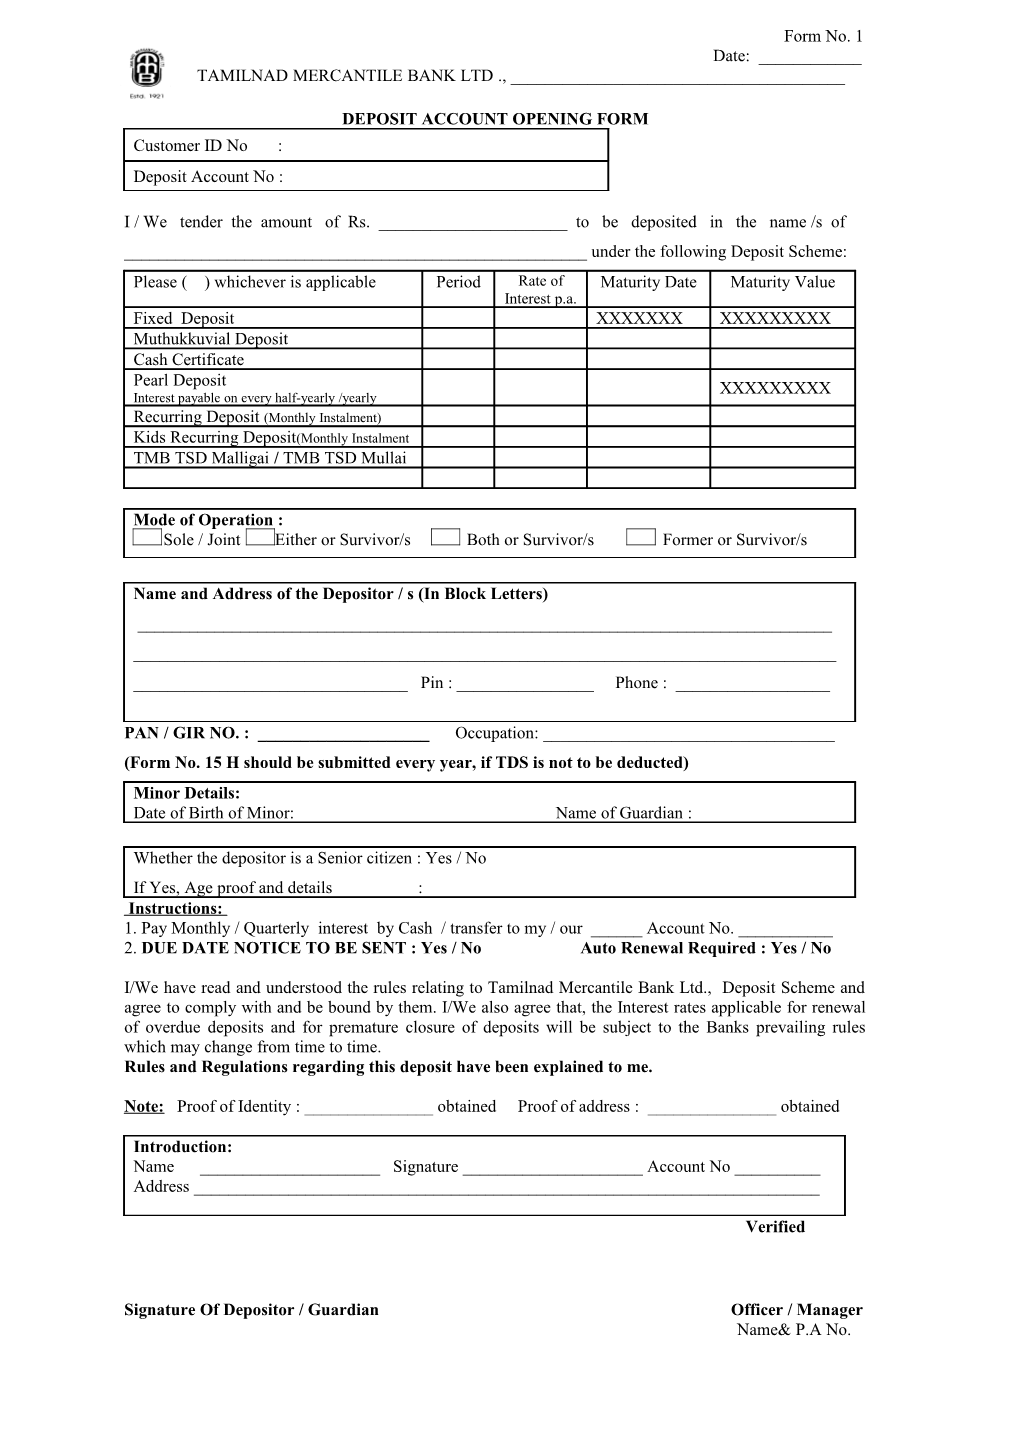 Deposit Account Opening Form